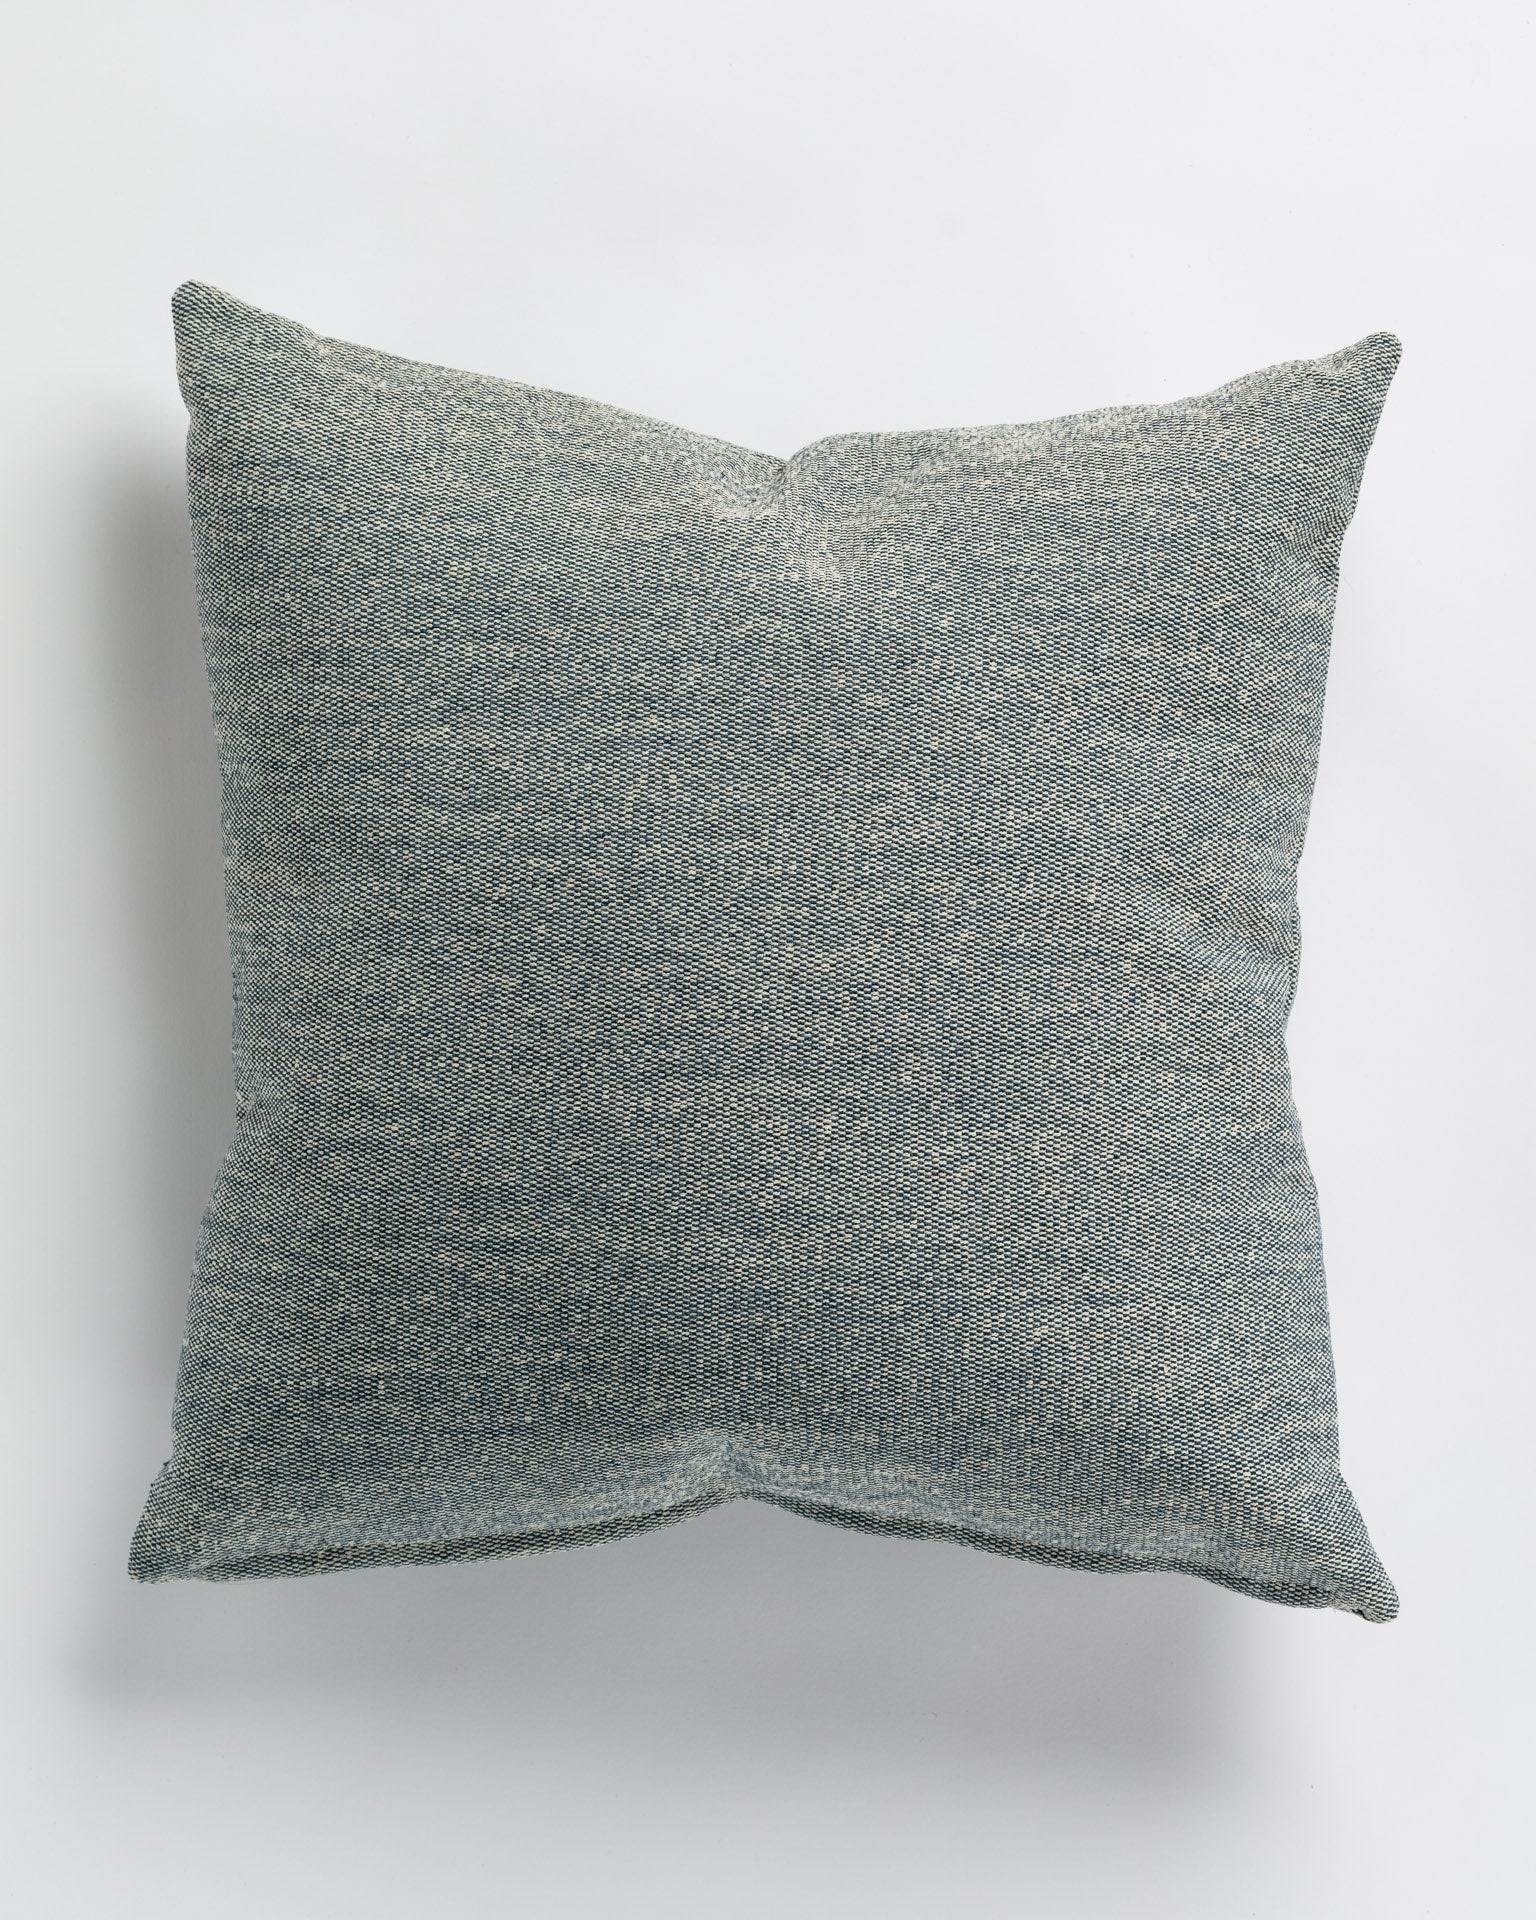 A Cross Stitch Sapphire Pillow - 26x26" by Gabby, with a textured gray fabric, displayed on a white background. The pillow, crafted in the style of a Scottsdale Arizona bungalow, appears soft and neatly sewn with an even fill.